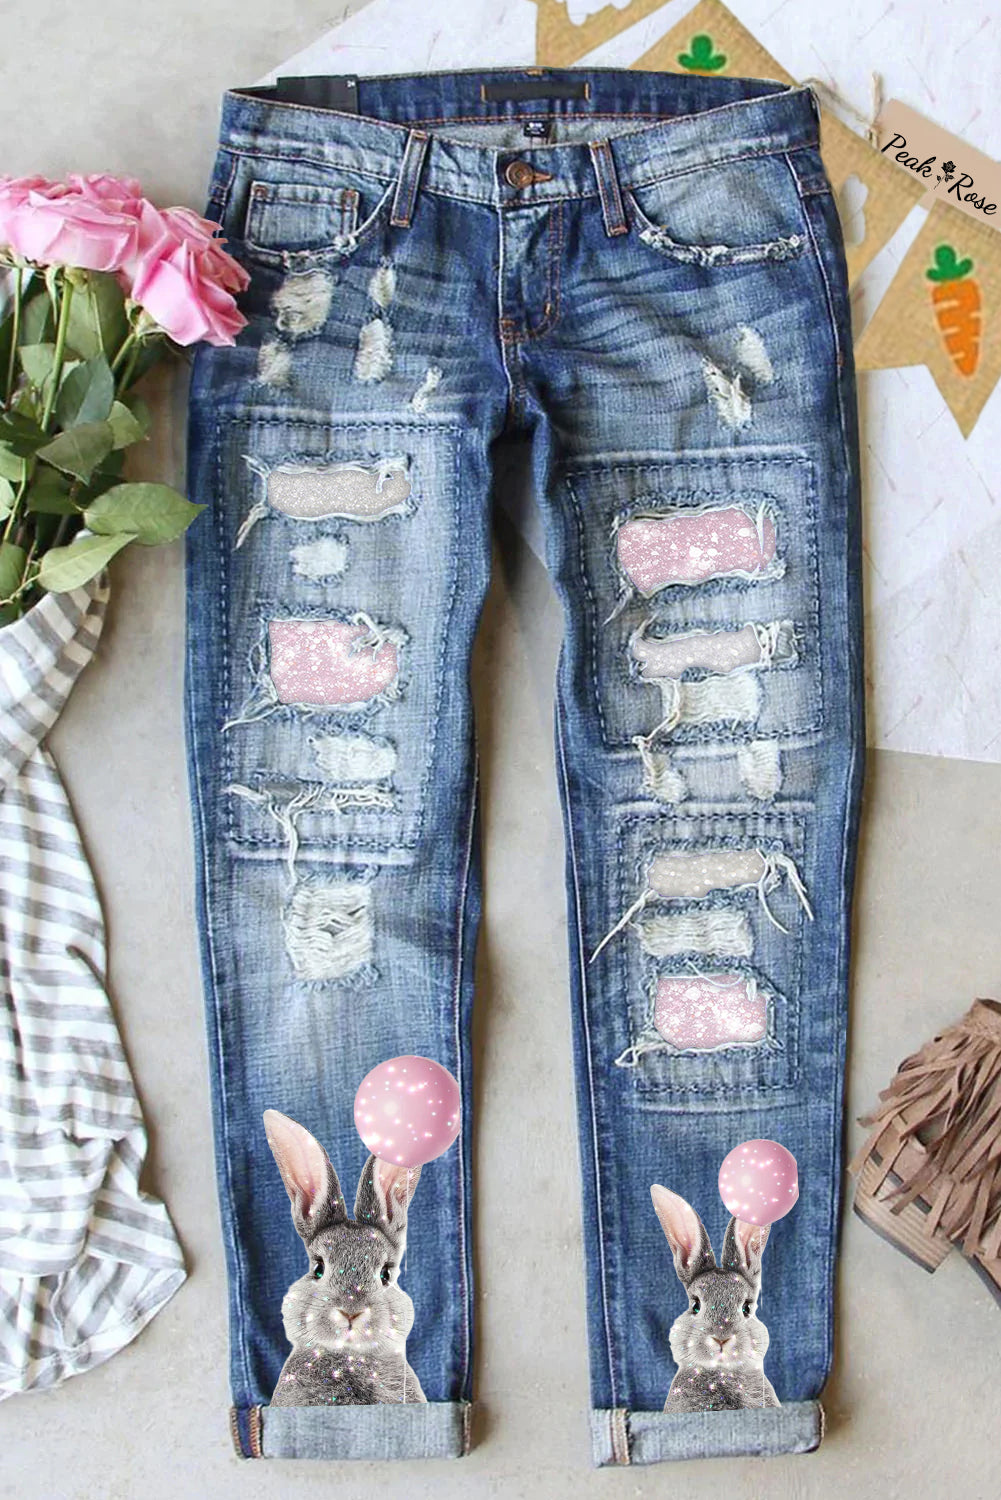 Glitter Cute Easter Bunny Holding A Pink Balloon Printed Ripped Denim Jeans